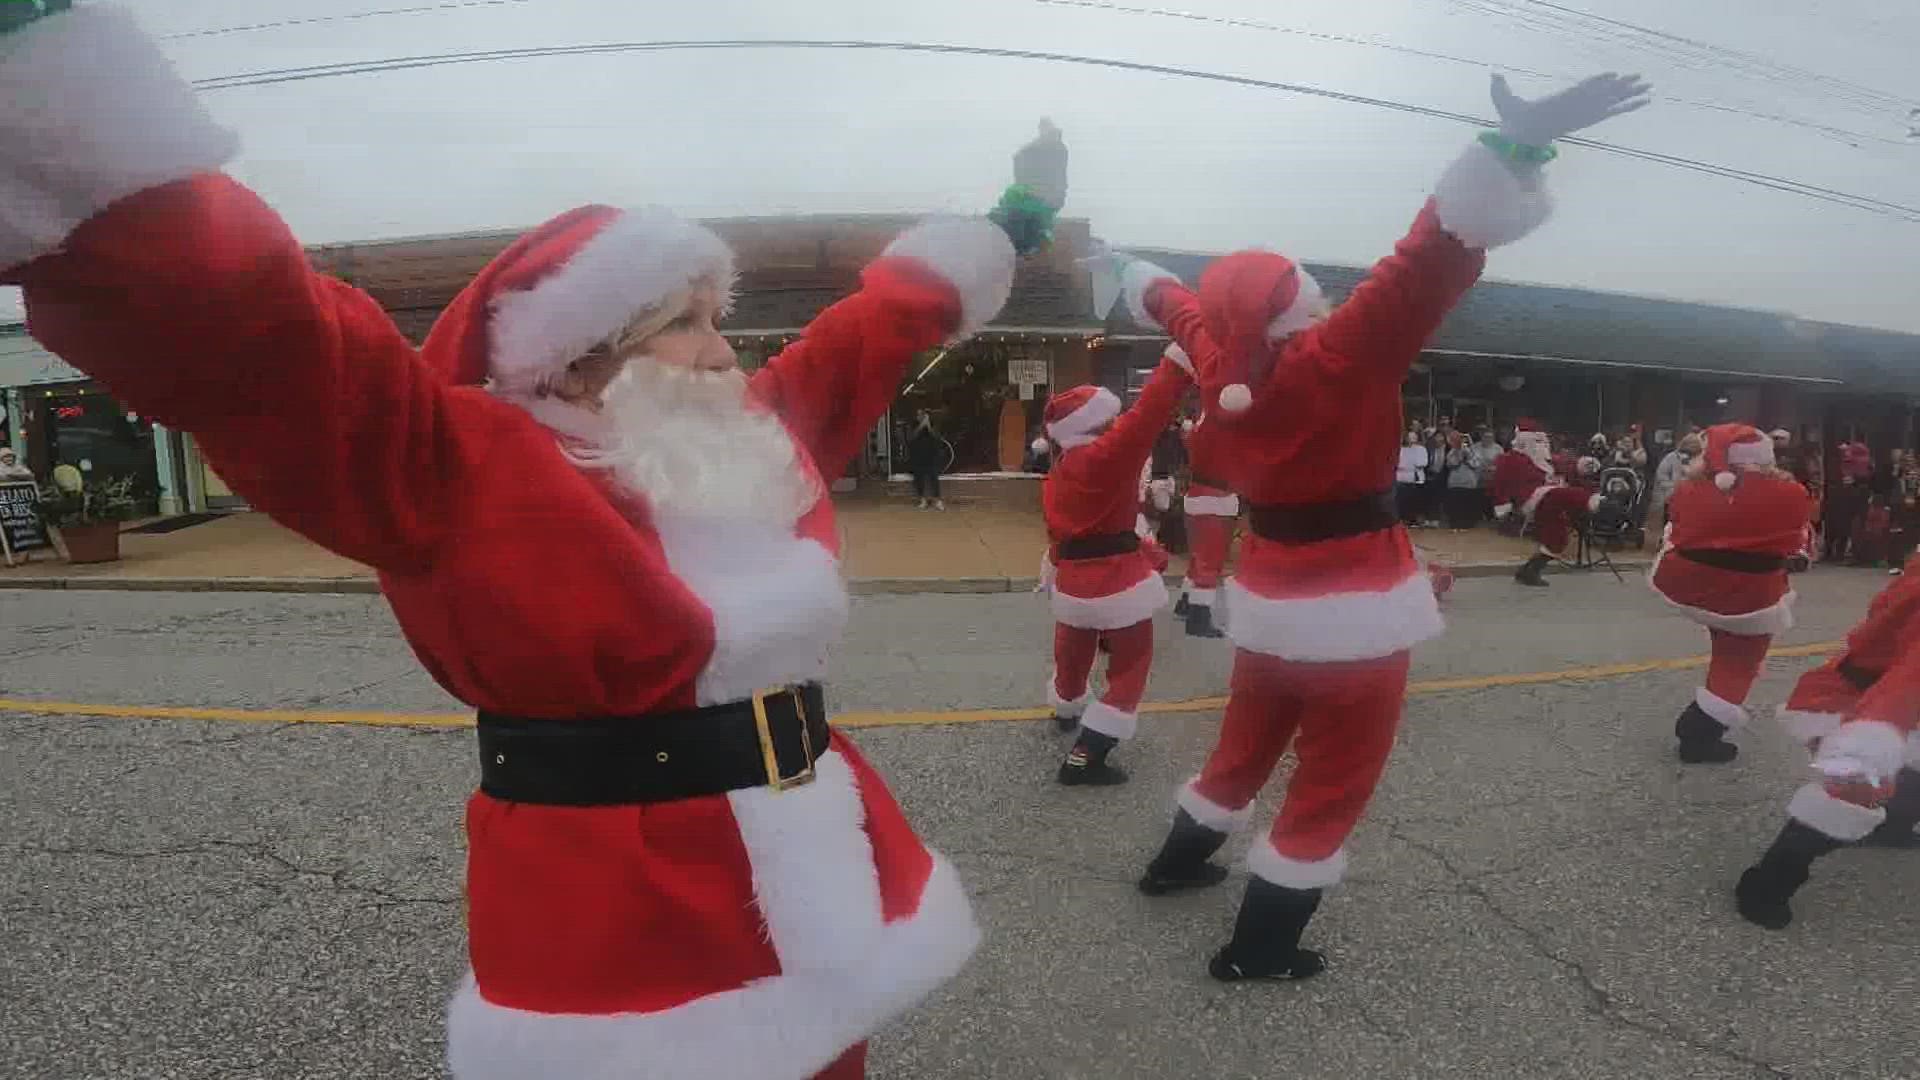 The Dancing Santas have been around for four years. This year, they're hoping to raise $2,022 for 100 Neediest Cases.